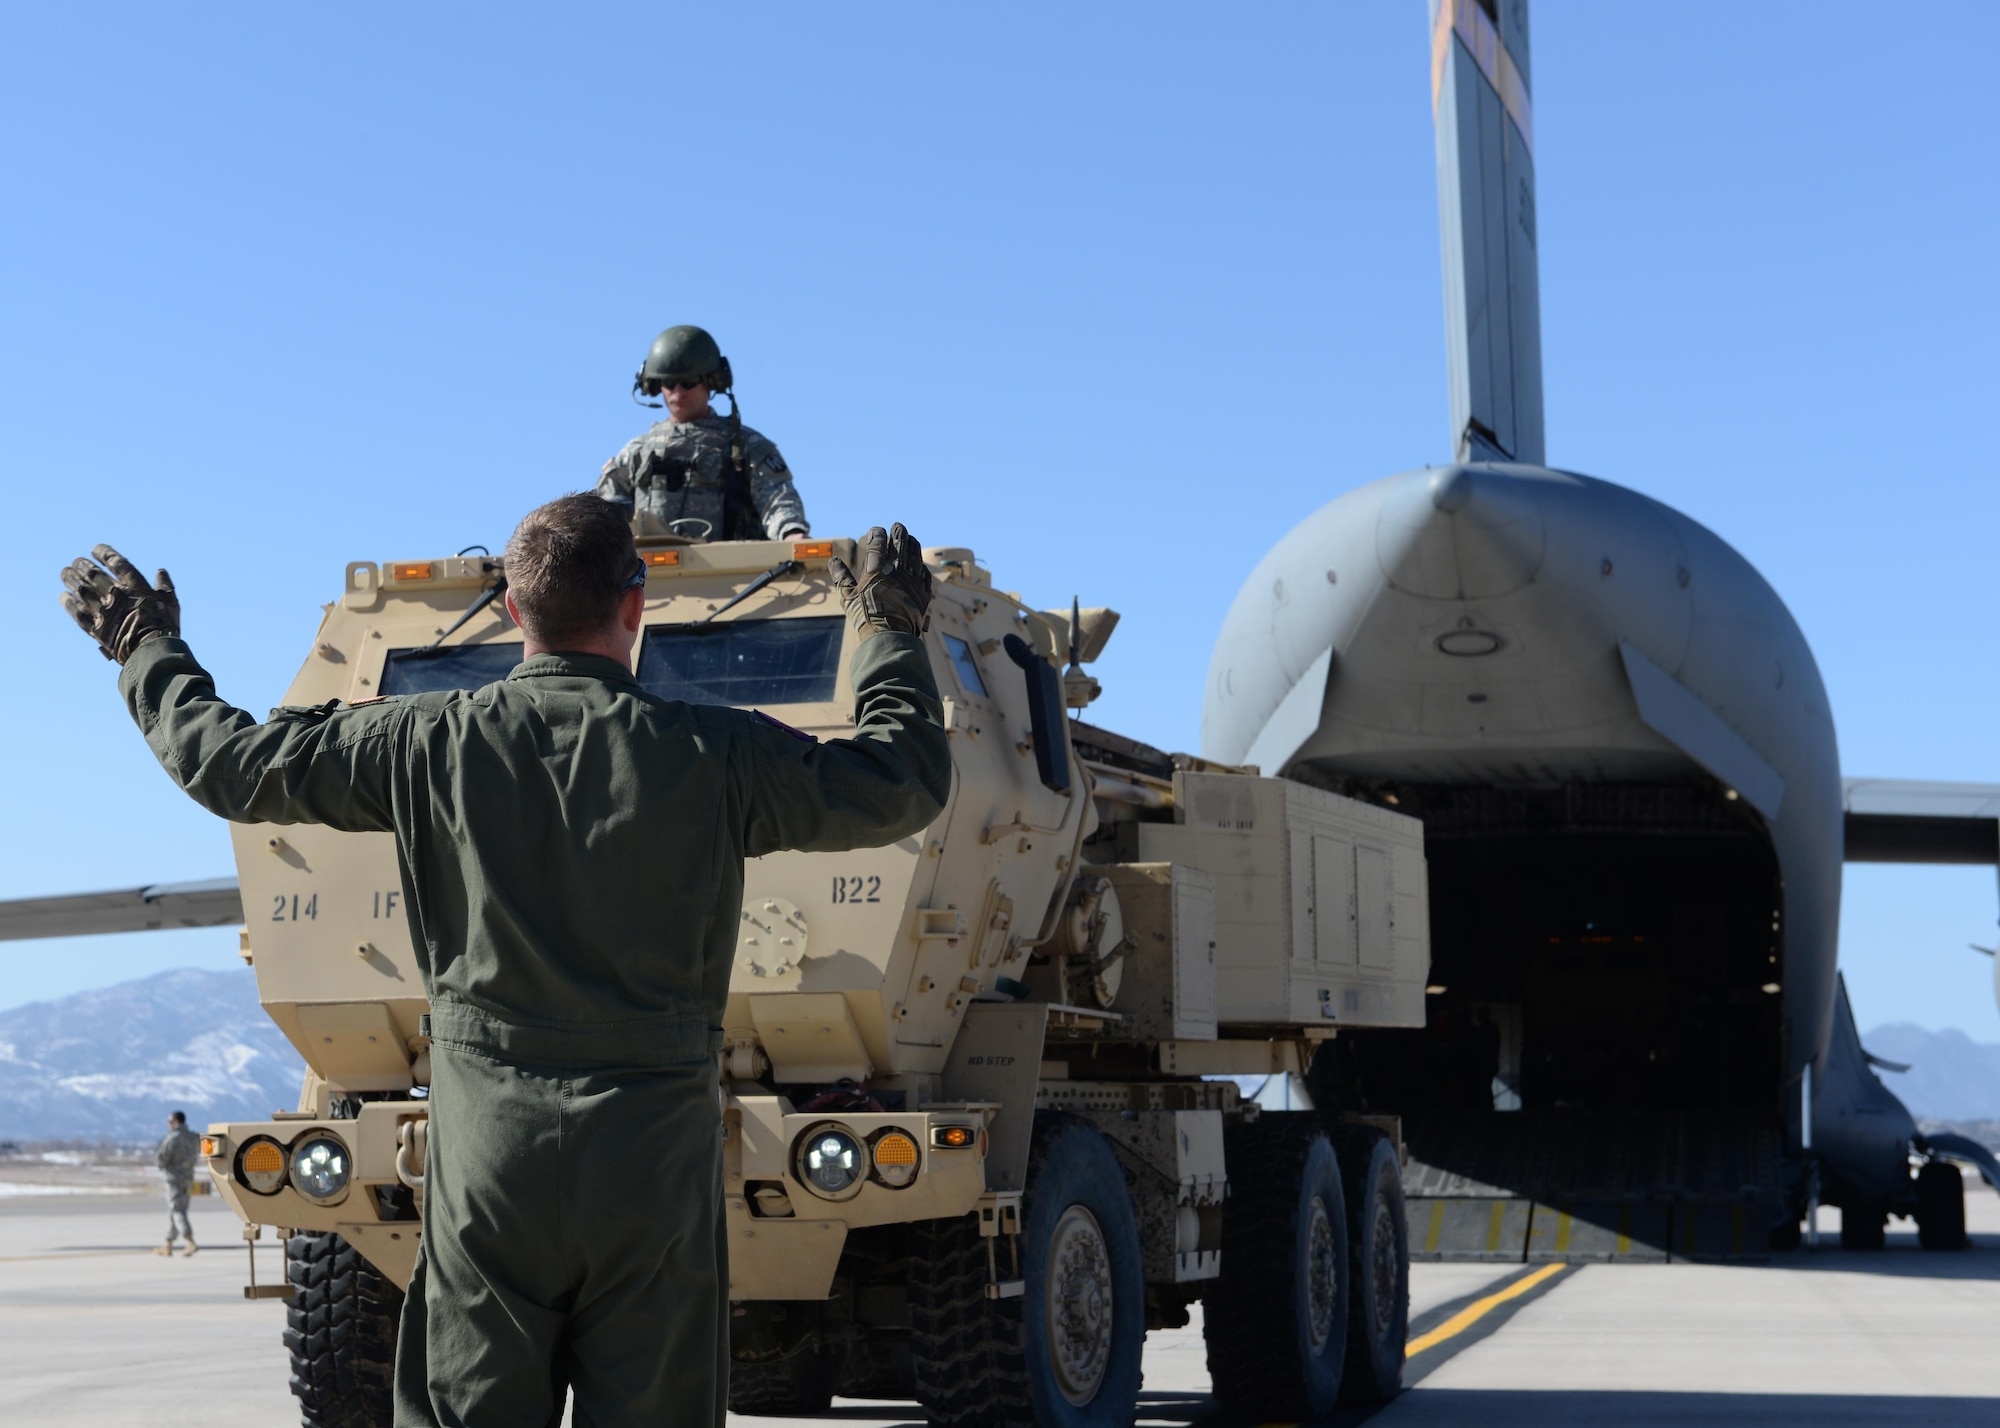 Air Force Staff Sgt. Jeffery Purvis directs an Army M142 High Mobility Artillery Rocket System onto an C-17 Globemaster III March 6, 2015, at Peterson Air Force Base, Colo. The training helped Airmen and Soldiers stay proficient in transporting, setting up and firing a HIMARS. The Soldiers were from the 1st Battalion, 14 Field Artillery Regiment, 214th Fires Brigade and Airmen were from the 58th Airlift Squadron and the 97th Logistics Readiness Squadron. (U.S. Air Force photo/Airman 1st Class Nathan Clark)